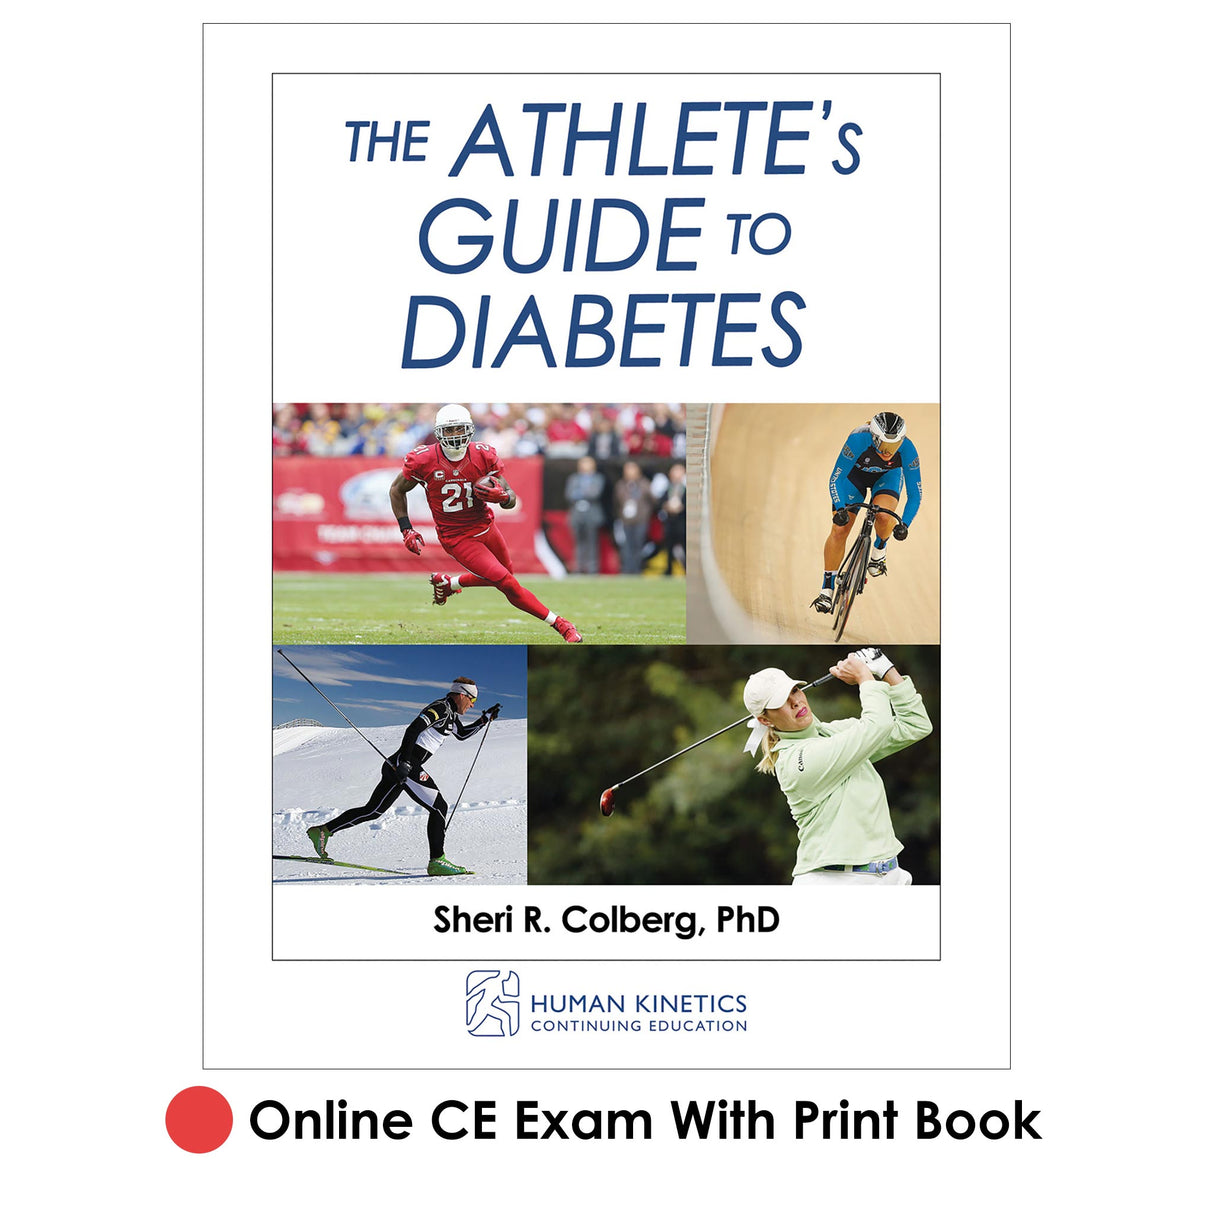 Athlete's Guide to Diabetes Online CE Exam With Print Book, The